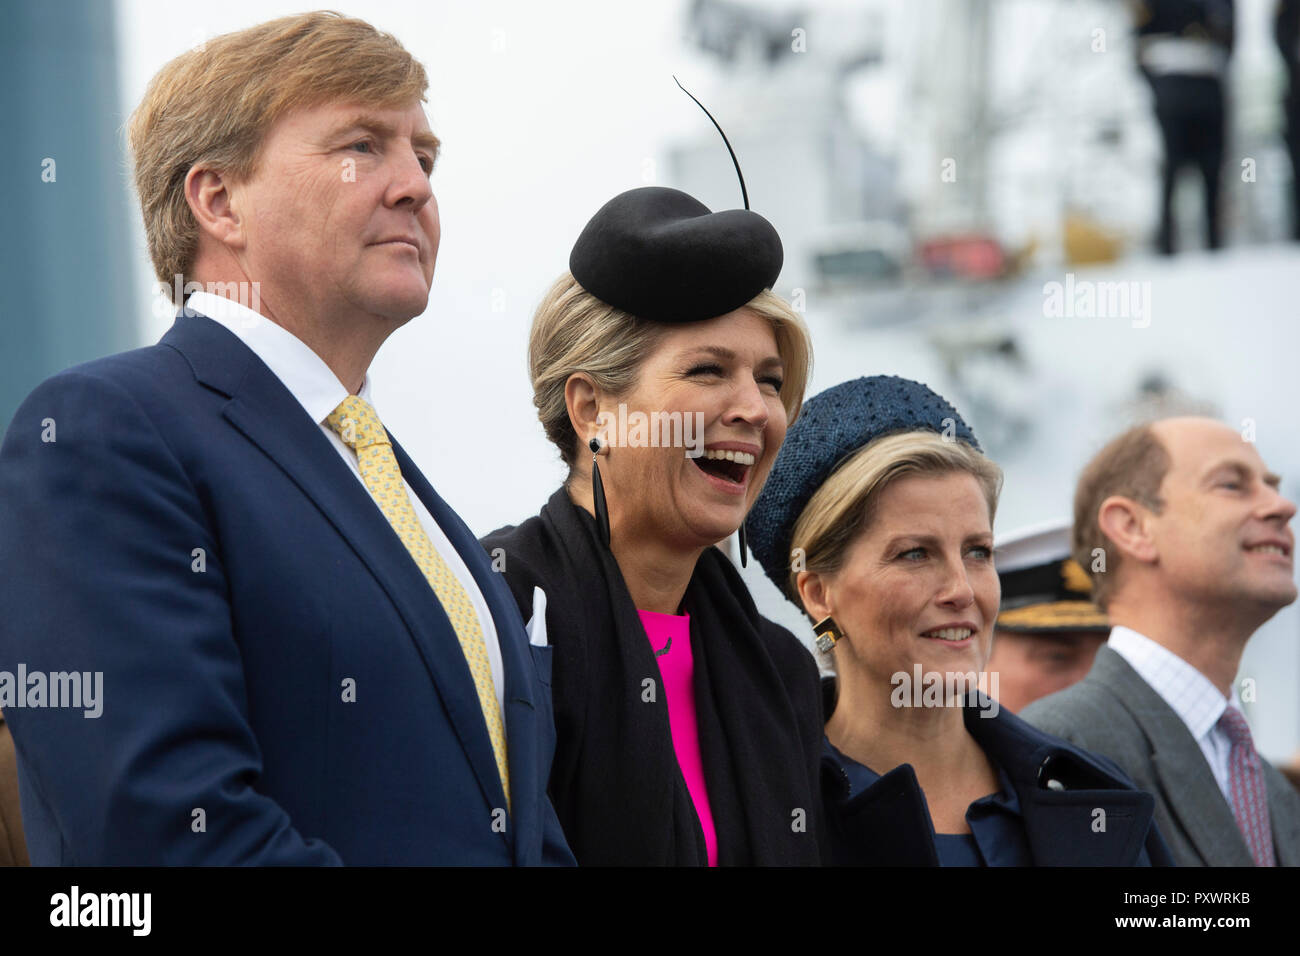 (Left to right) King Willem-Alexander and Queen Maxima of the Netherlands with the Countess and Earl of Wessex on HMS Belfast in London to watch an on-the-water capability demonstration between the Royal Netherlands Marine Corps and the Royal Marines. Stock Photo